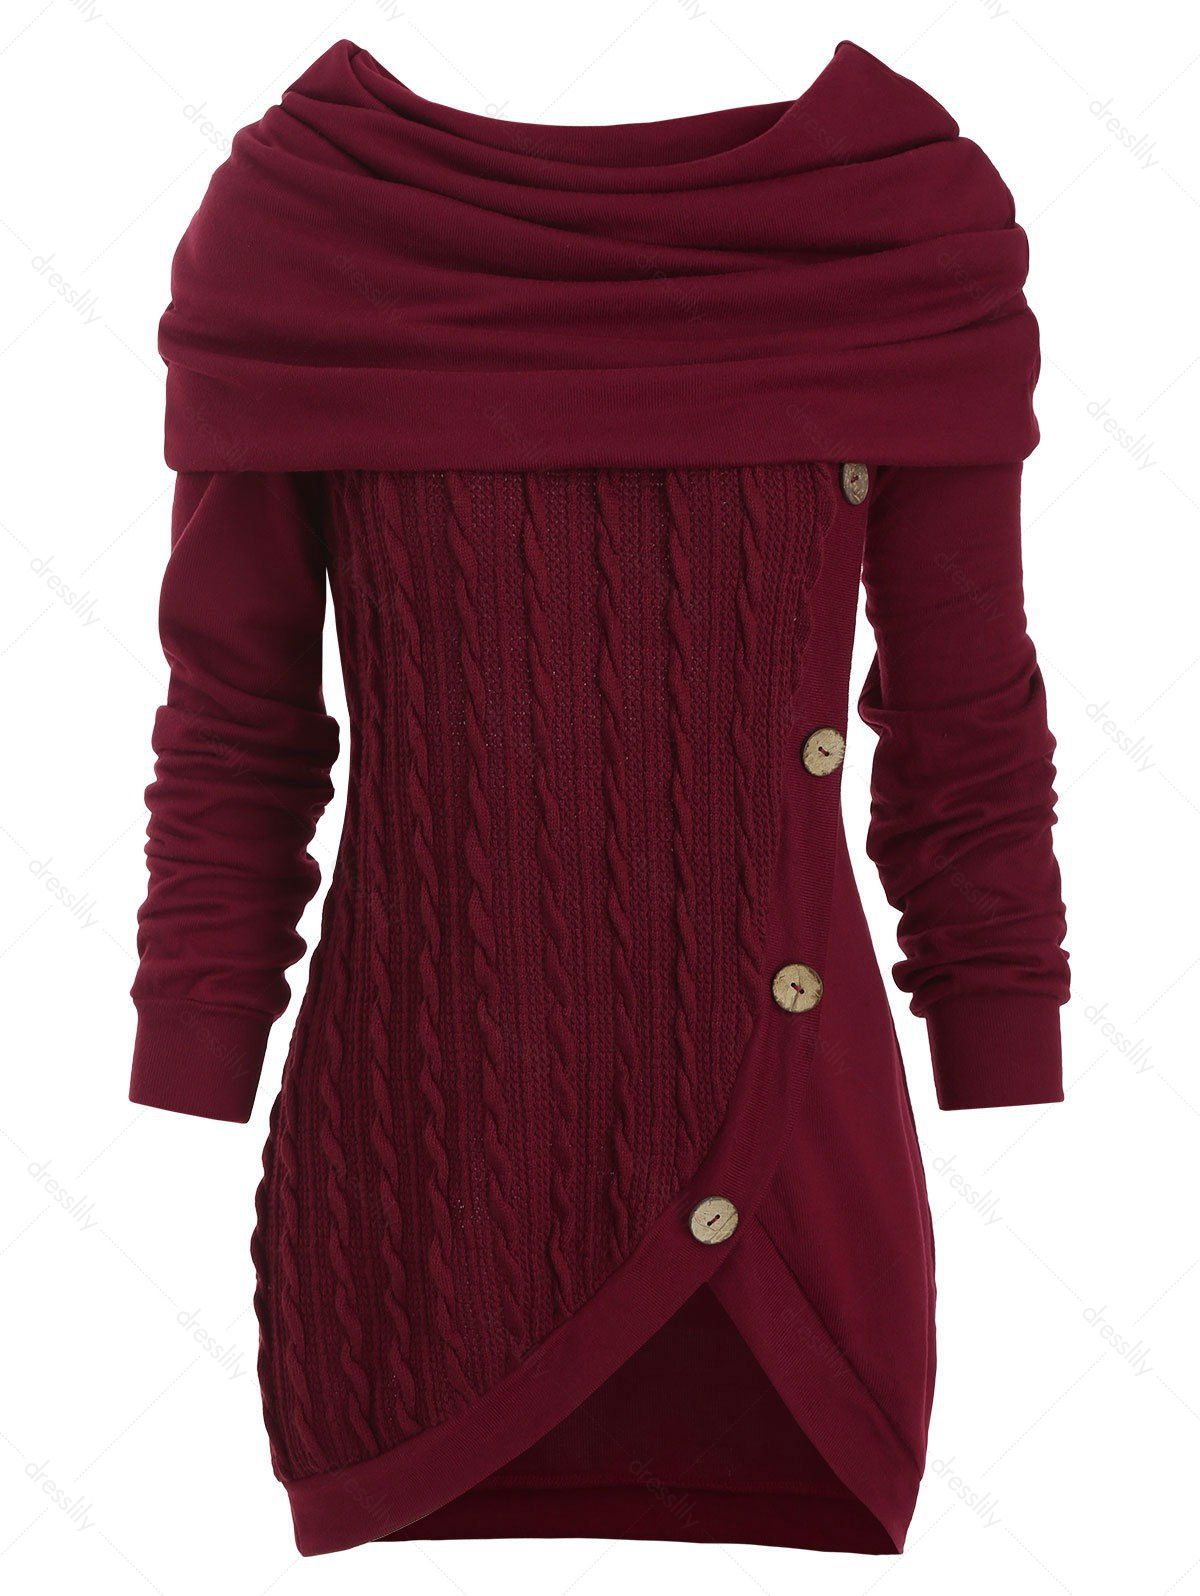 Cowl Neck Mock Button Cable Knit Knitwear - RED WINE 3XL